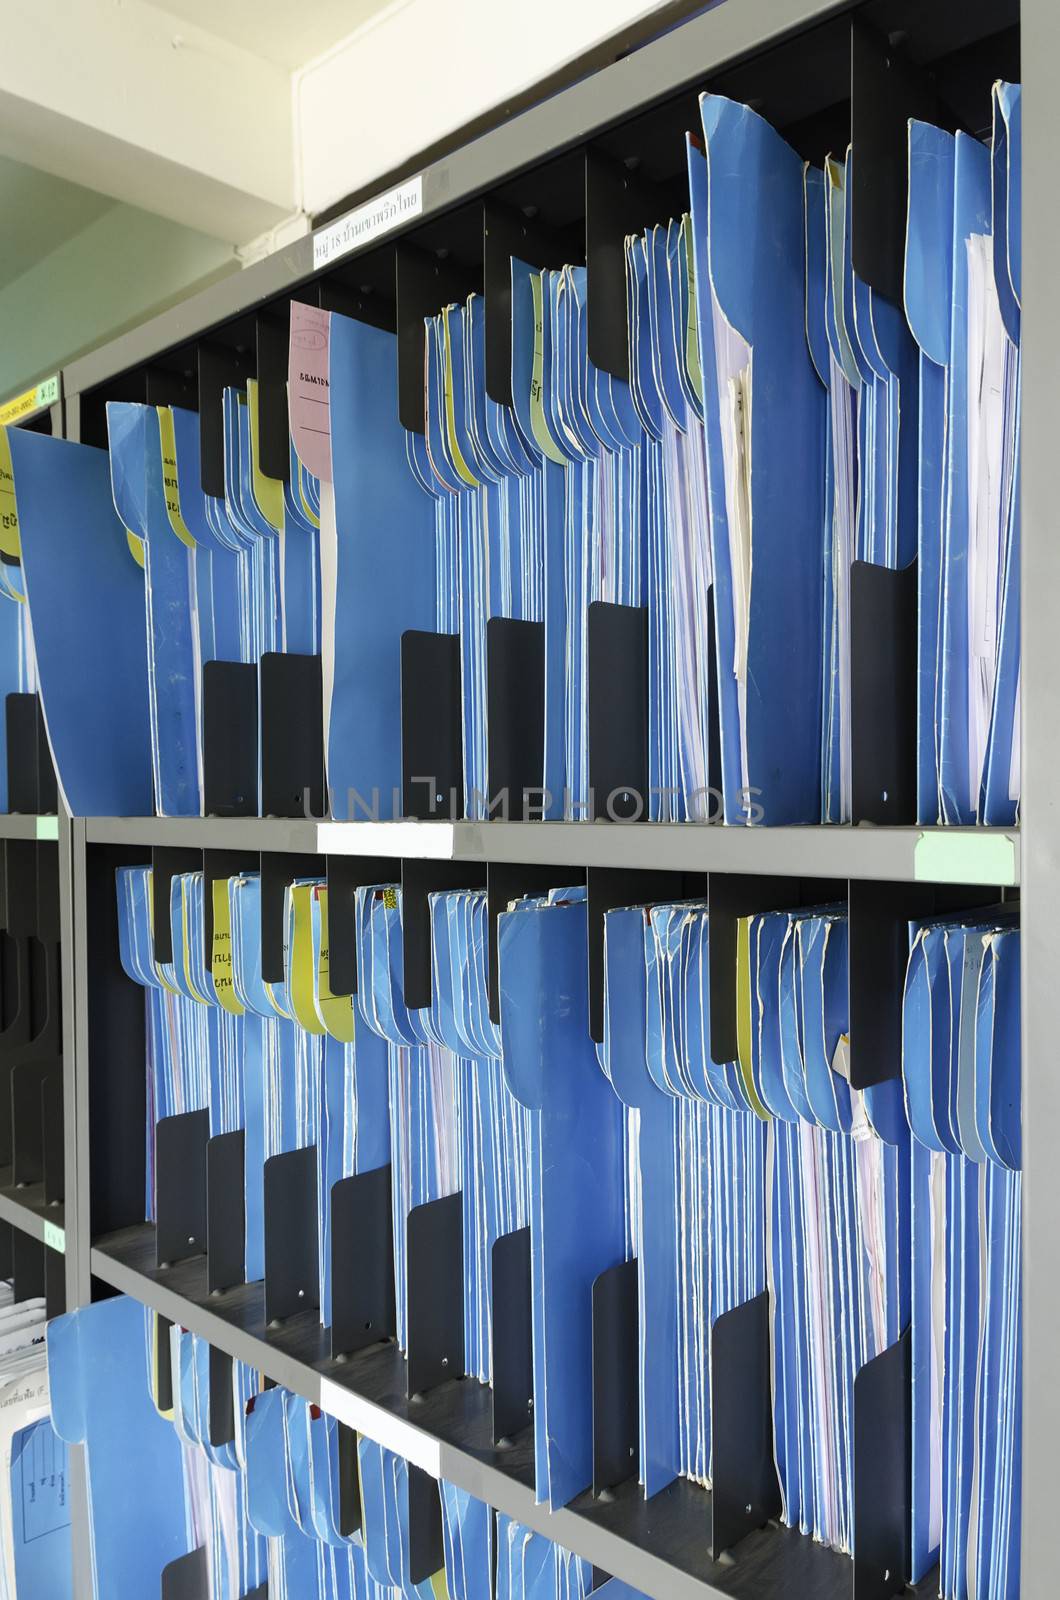 Shelf full of folders and files in an office